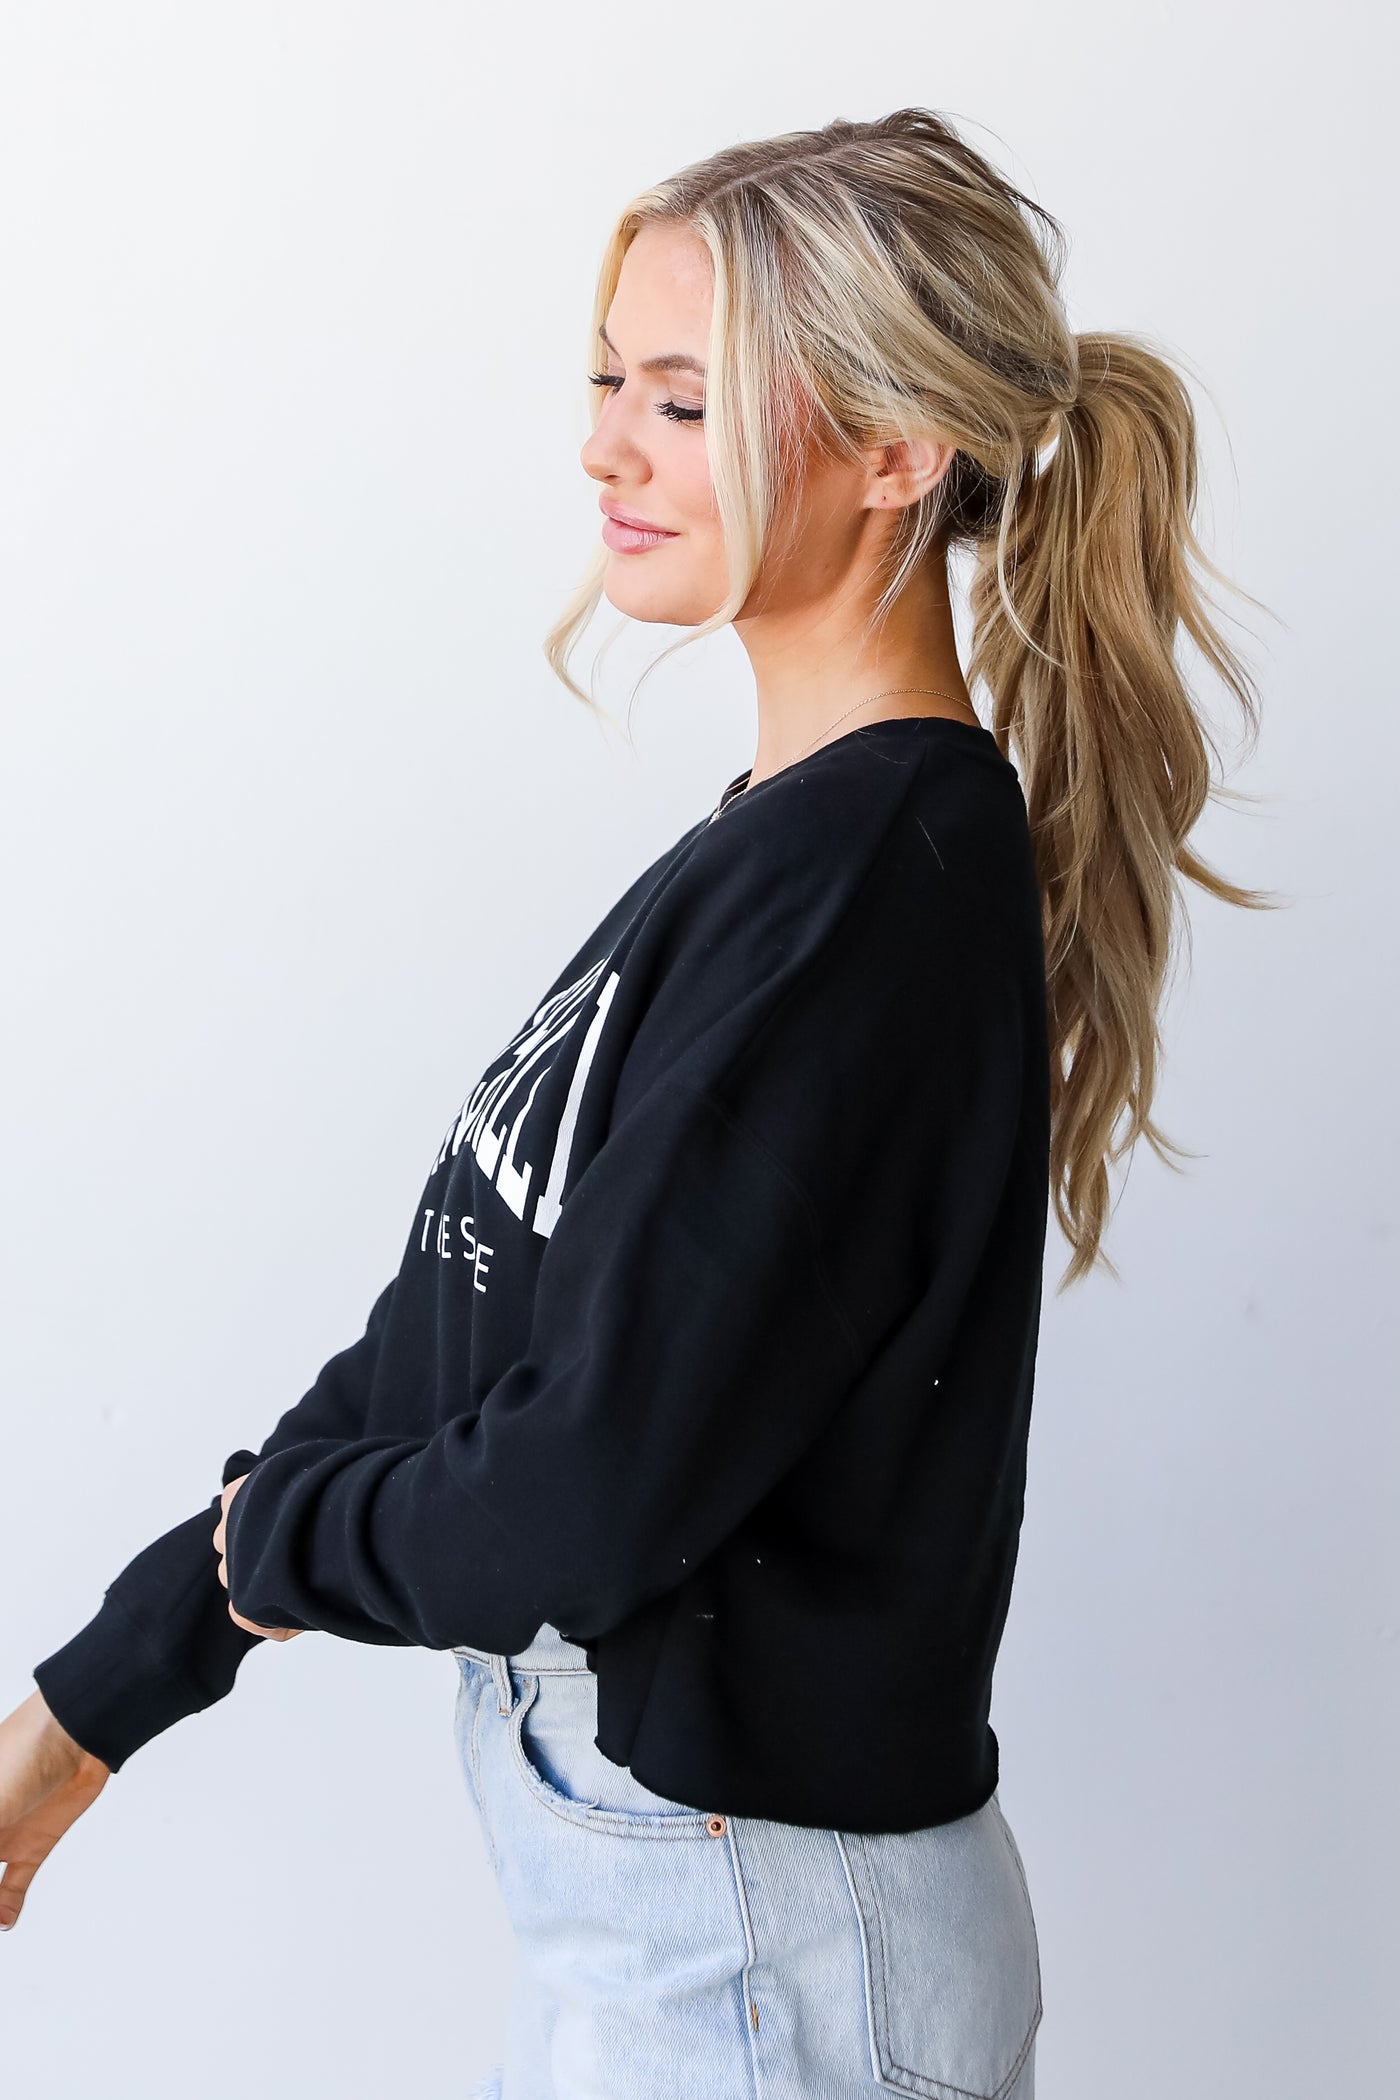 Black Nashville Tennessee Cropped Pullover side view